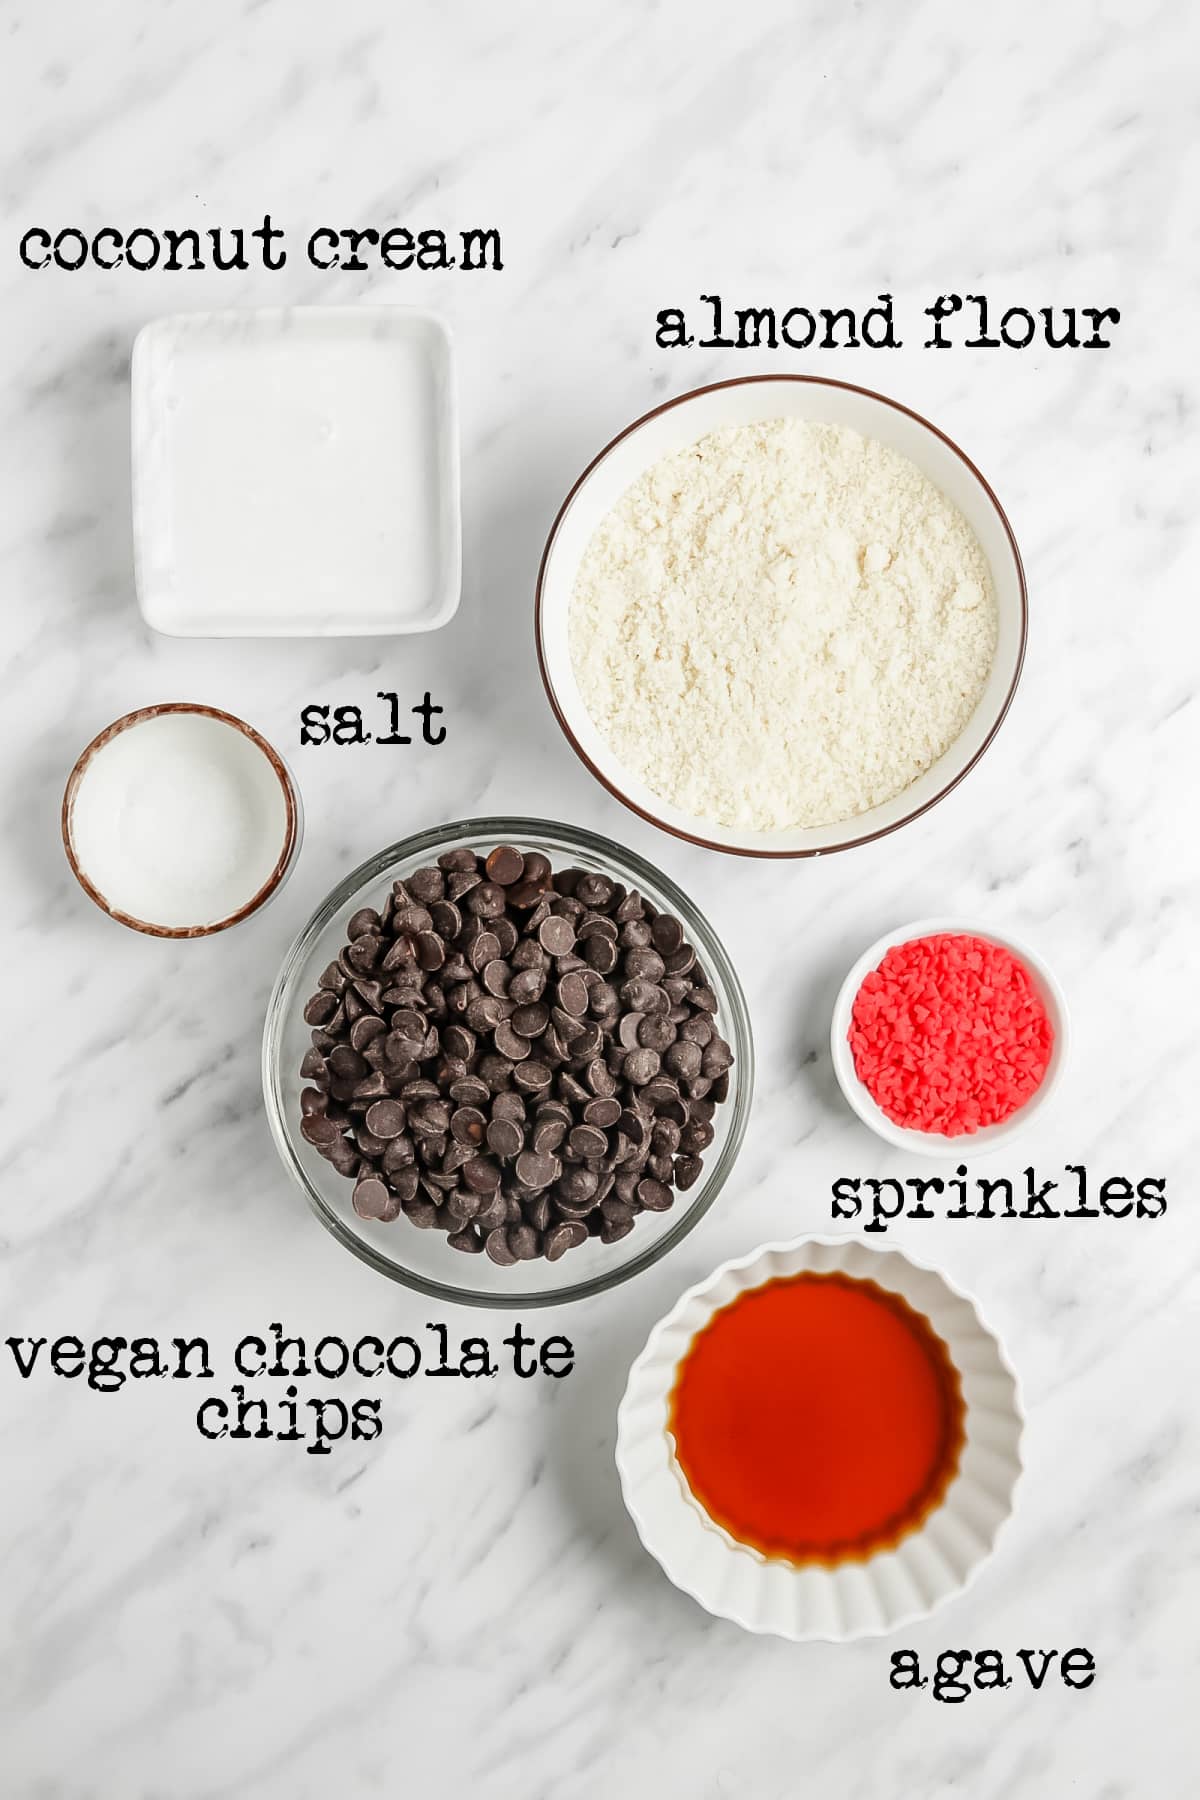 overhead image of all ingredients needed for chocolate balls, labeled with text.